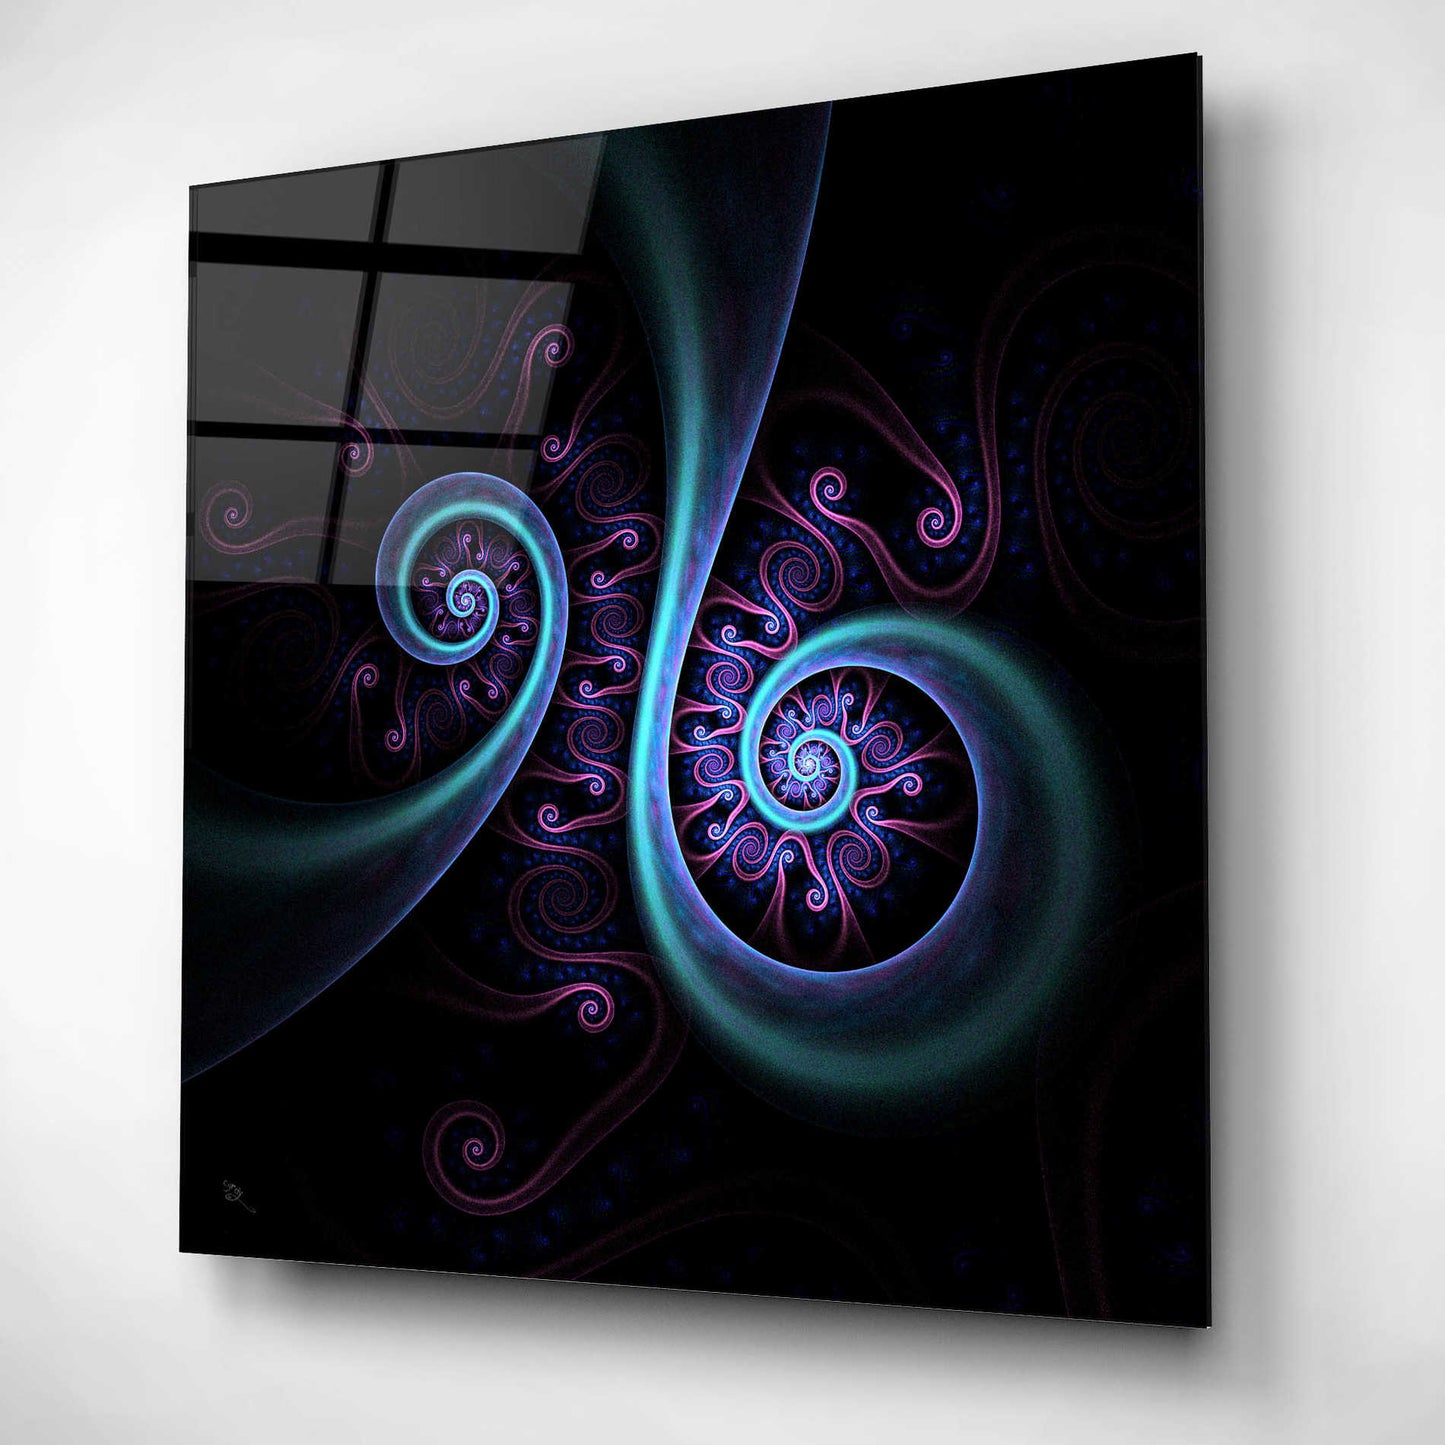 Epic Art 'Connectivity' by Cameron Gray, Acrylic Glass Wall Art,12x12